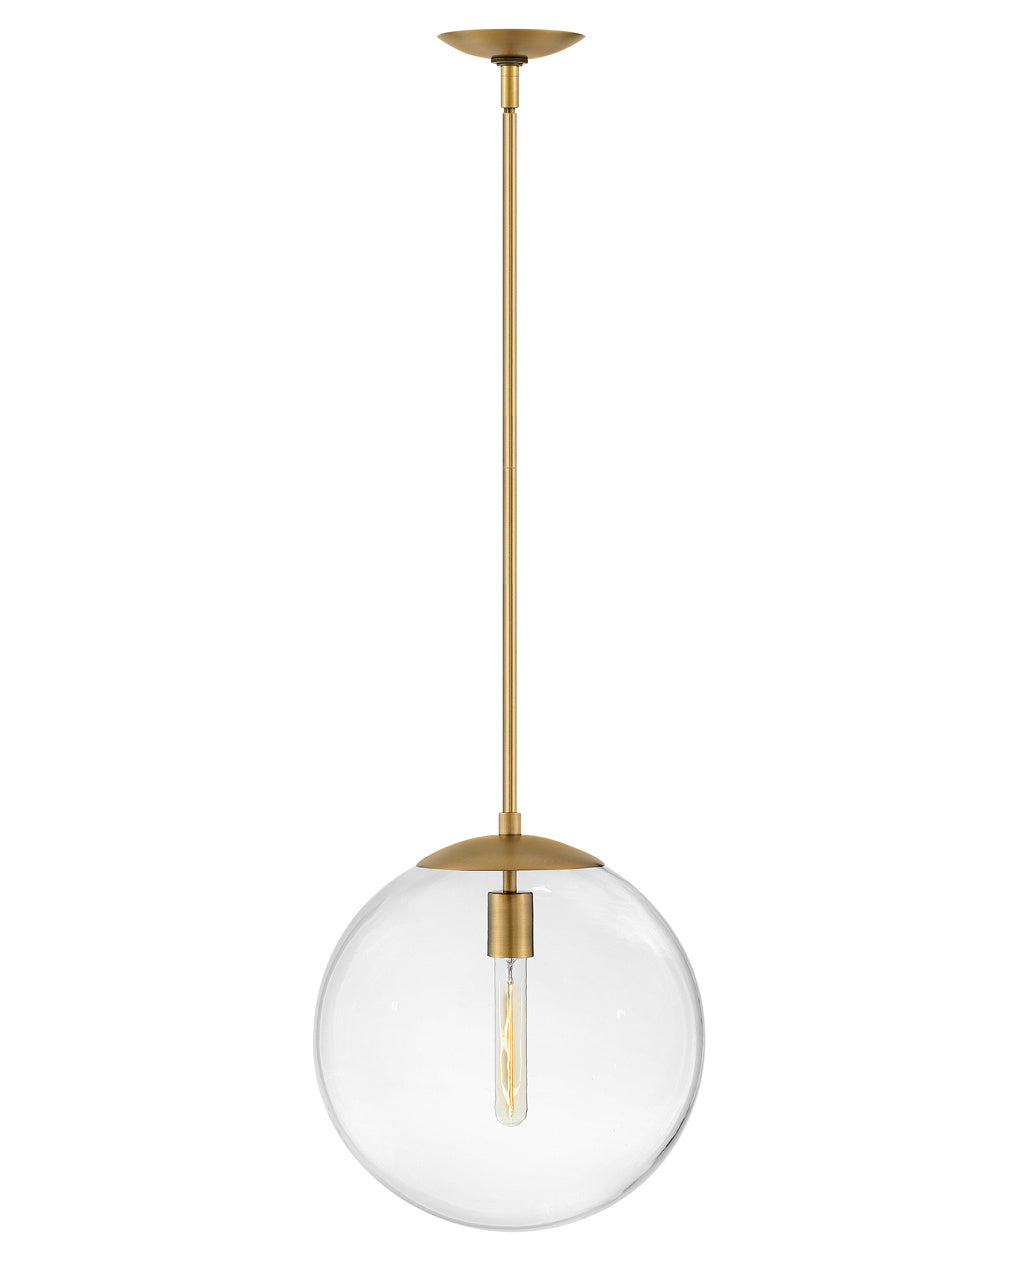 Hinkley - 3744HB - LED Pendant - Warby - Heritage Brass